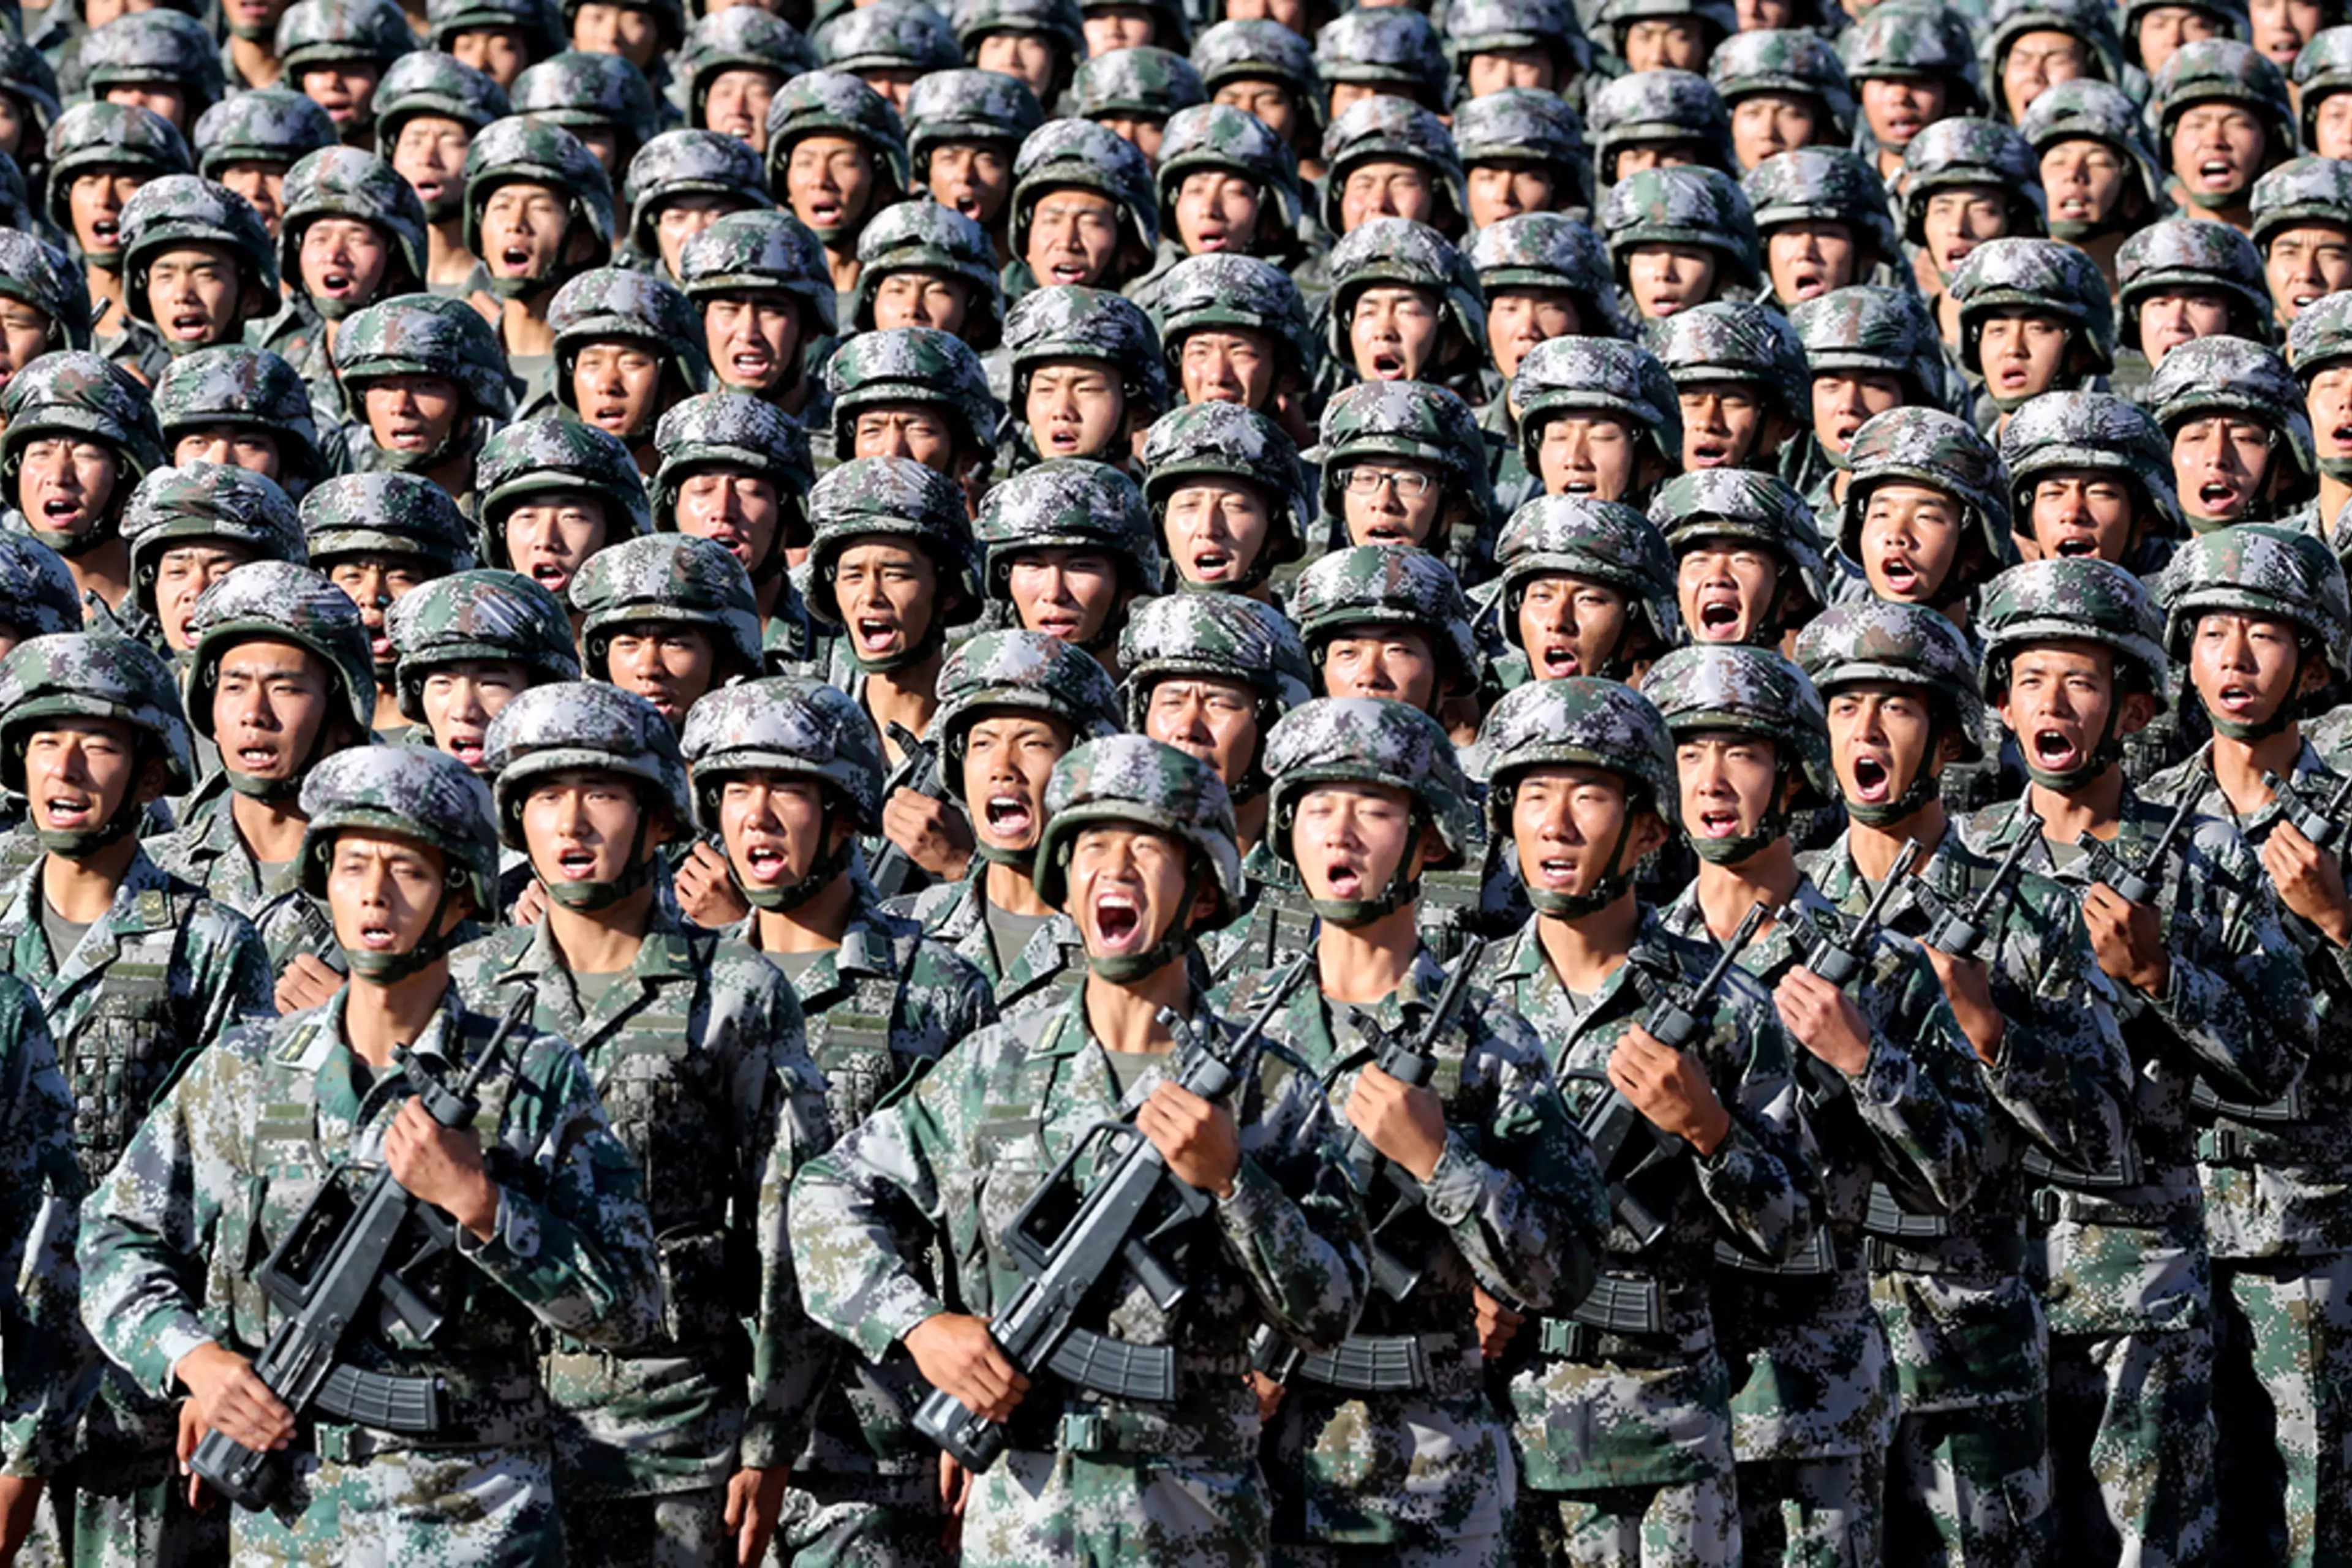 PLA soldiers prepare for a military parade in 2017.